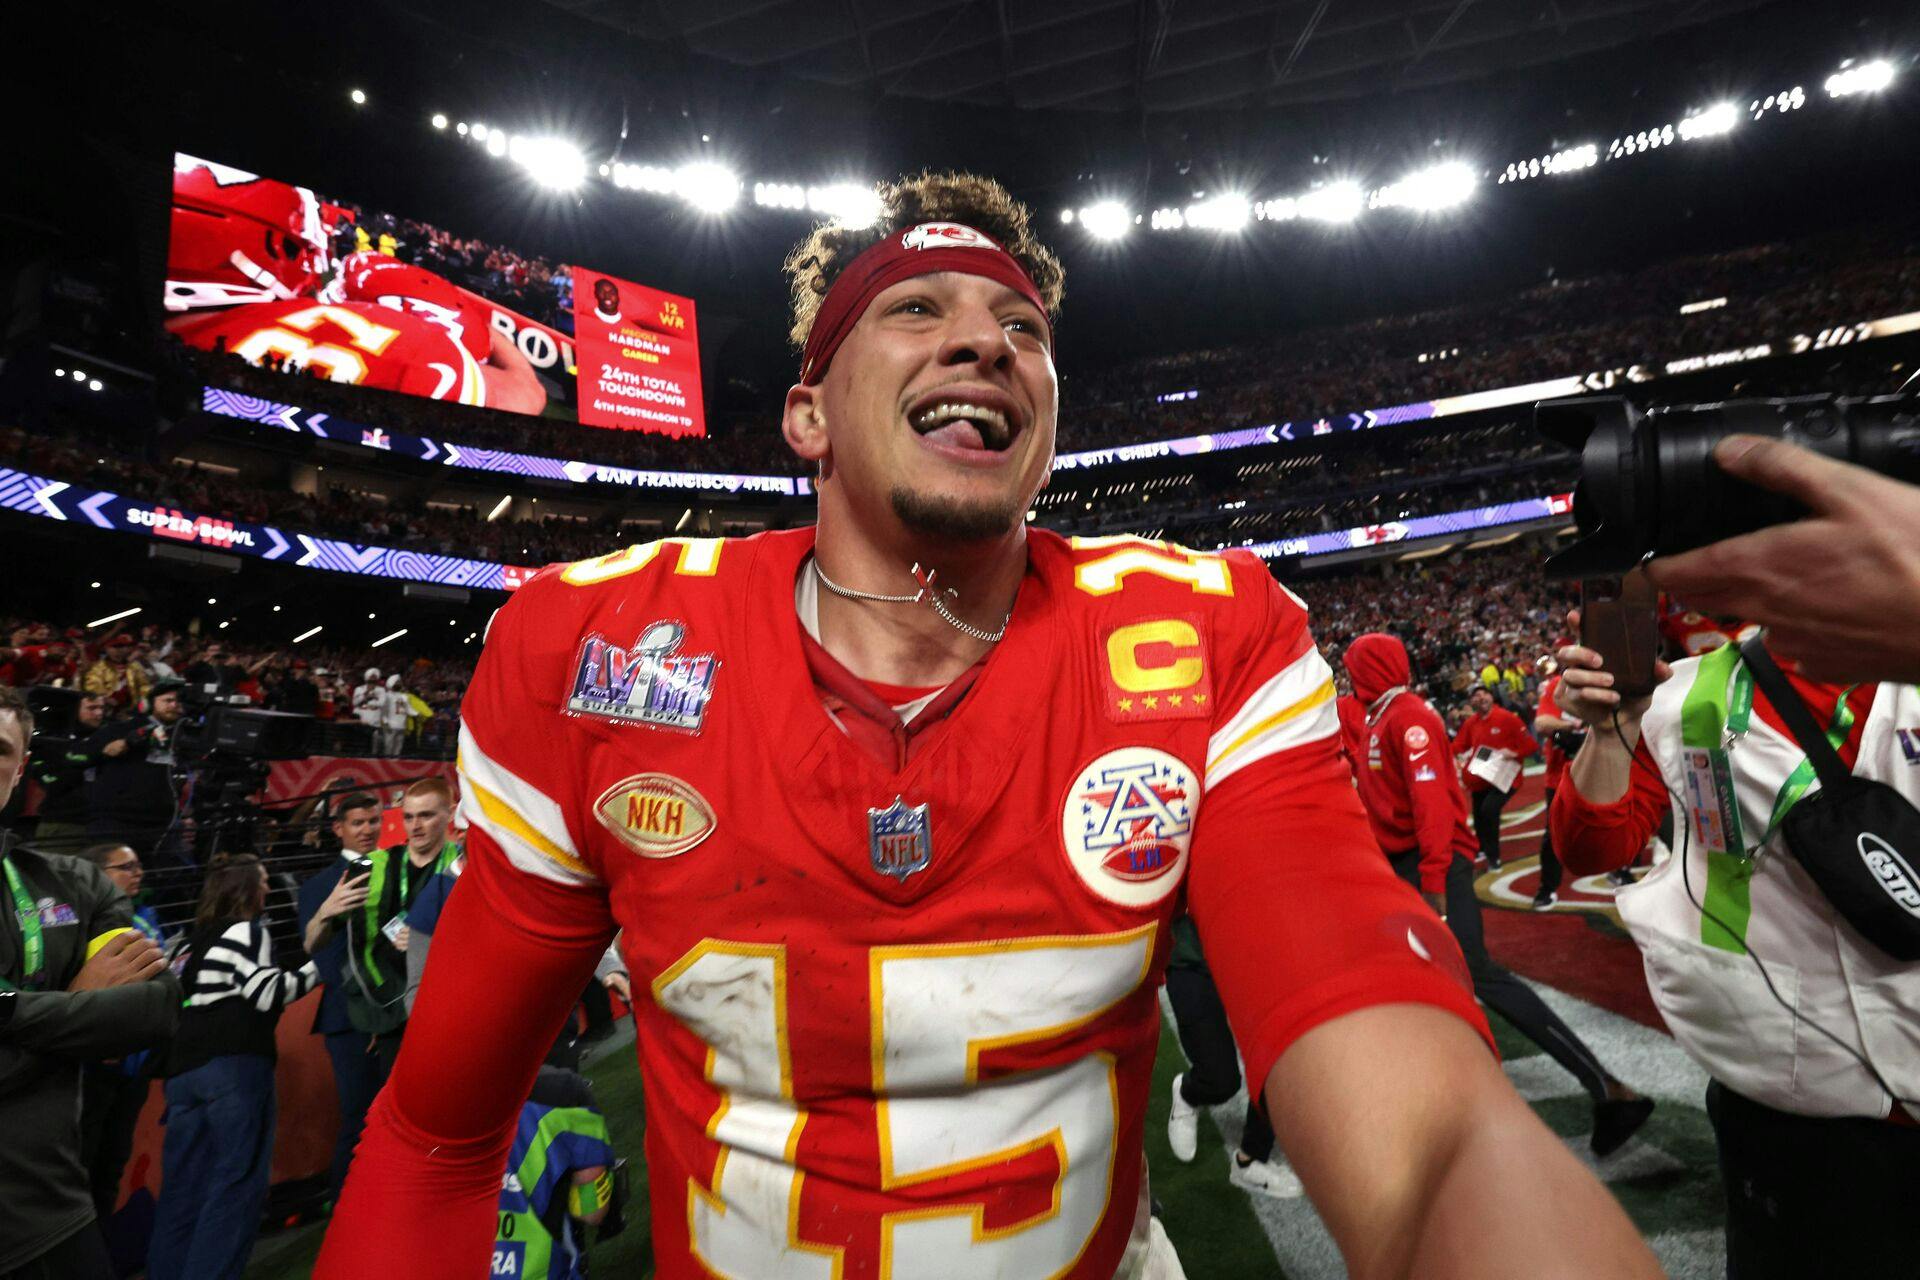 LAS VEGAS, NEVADA - FEBRUARY 11: Patrick Mahomes #15 of the Kansas City Chiefs celebrates after defeating the San Francisco 49ers 25-22 /d during Super Bowl LVIII at Allegiant Stadium on February 11, 2024 in Las Vegas, Nevada. Jamie Squire/Getty Images/AFP (Photo by JAMIE SQUIRE / GETTY IMAGES NORTH AMERICA / Getty Images via AFP)